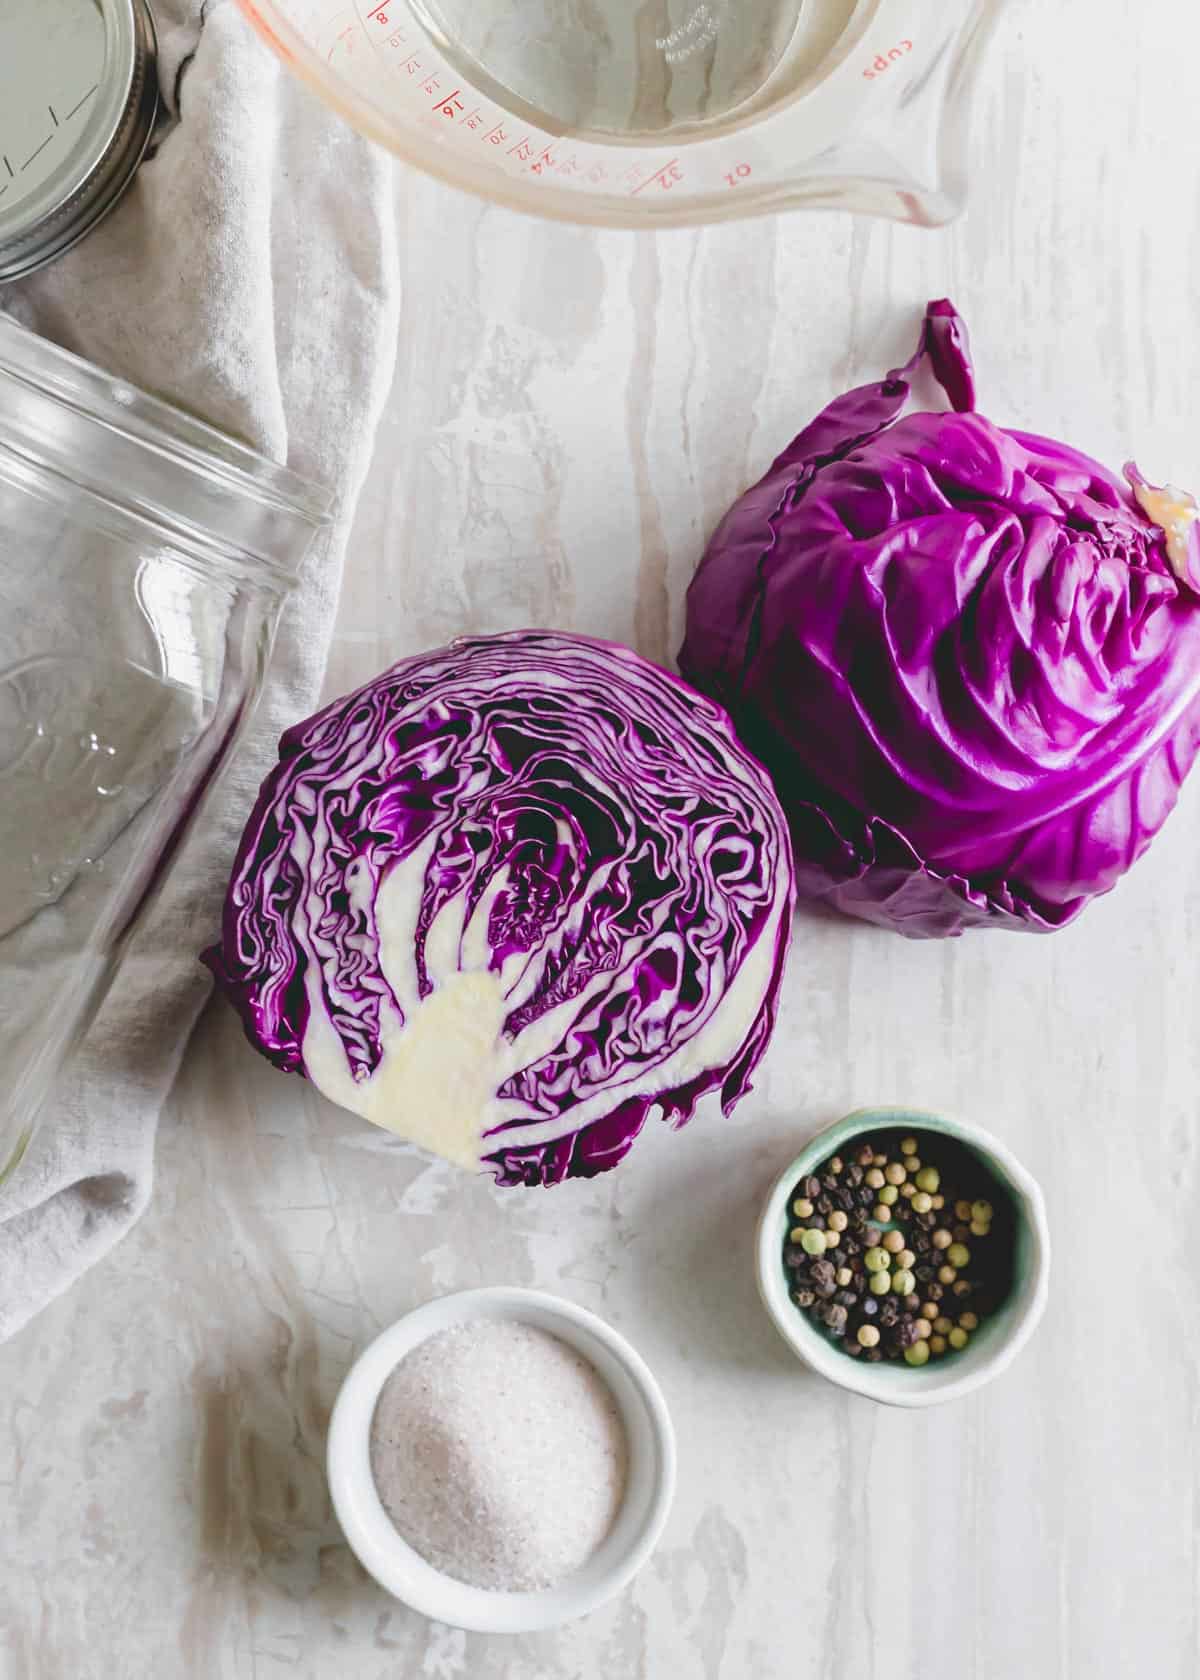 Ingredients to make red cabbage sauerkraut: red cabbage sliced in half, water, salt and peppercorns on a white surface.